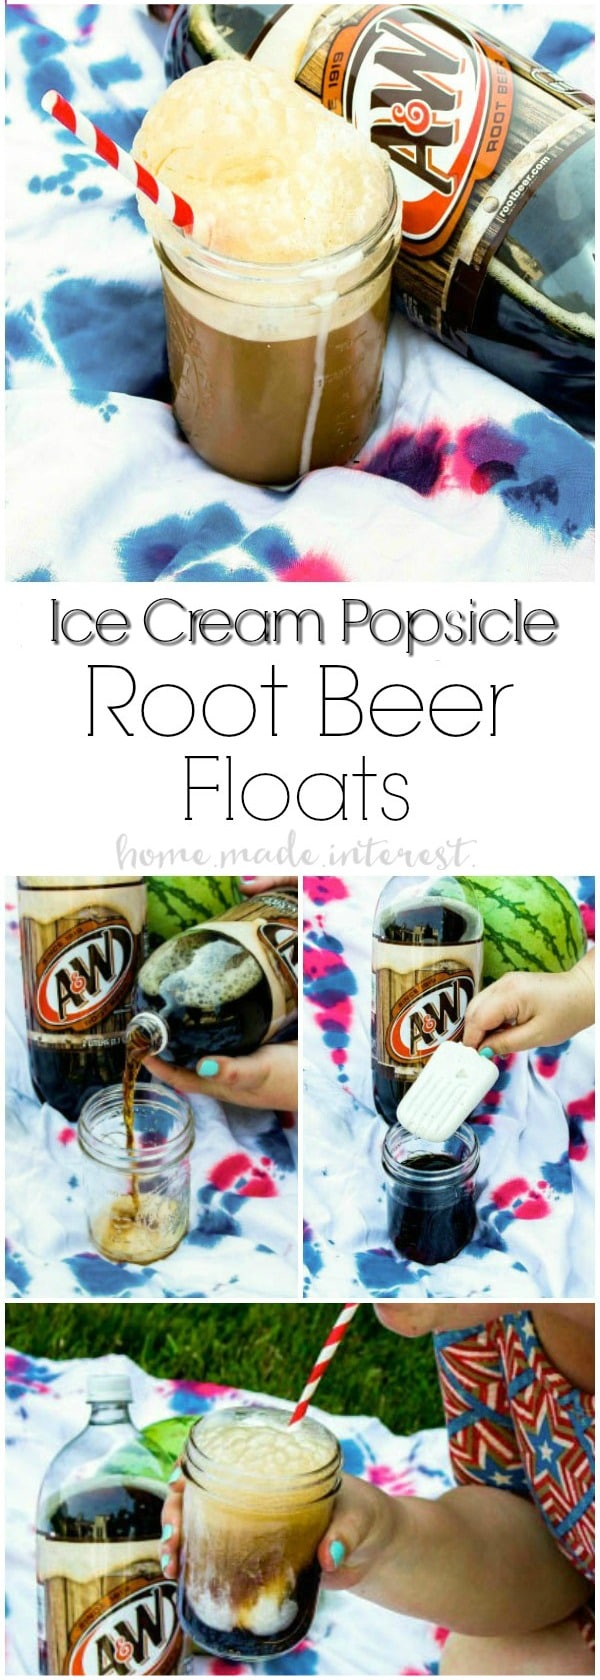 Ice Cream Popsicle Root Beer Floats | Make root beer floats even easier with these Ice Cream Popsicle Root Beer Floats. Vanilla ice cream popsicles make root beer floats simple and fun! This root beer float recipe is a great summer dessert or a 4th of July dessert recipe that friends and family can enjoy on the go! 